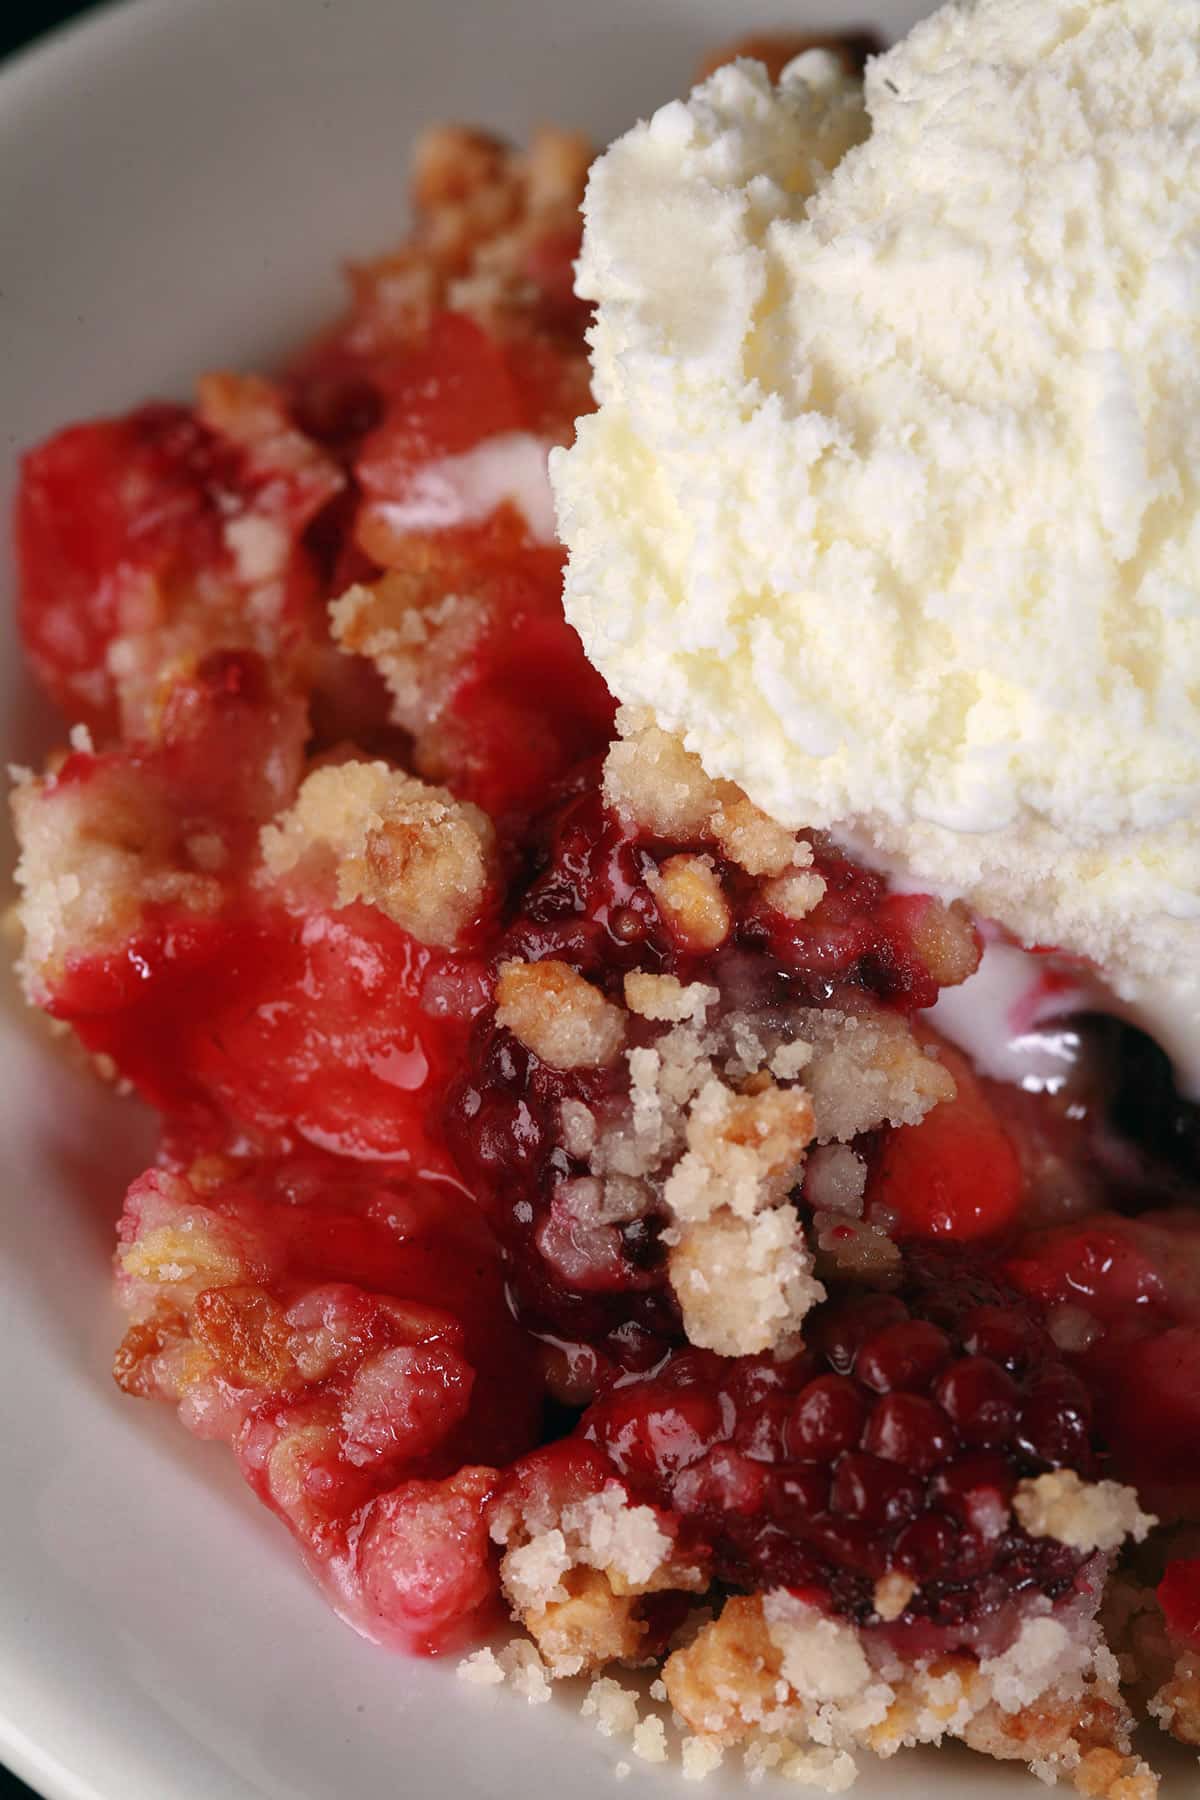 A serving of apple blackberry crumble topped with vanilla ice cream.